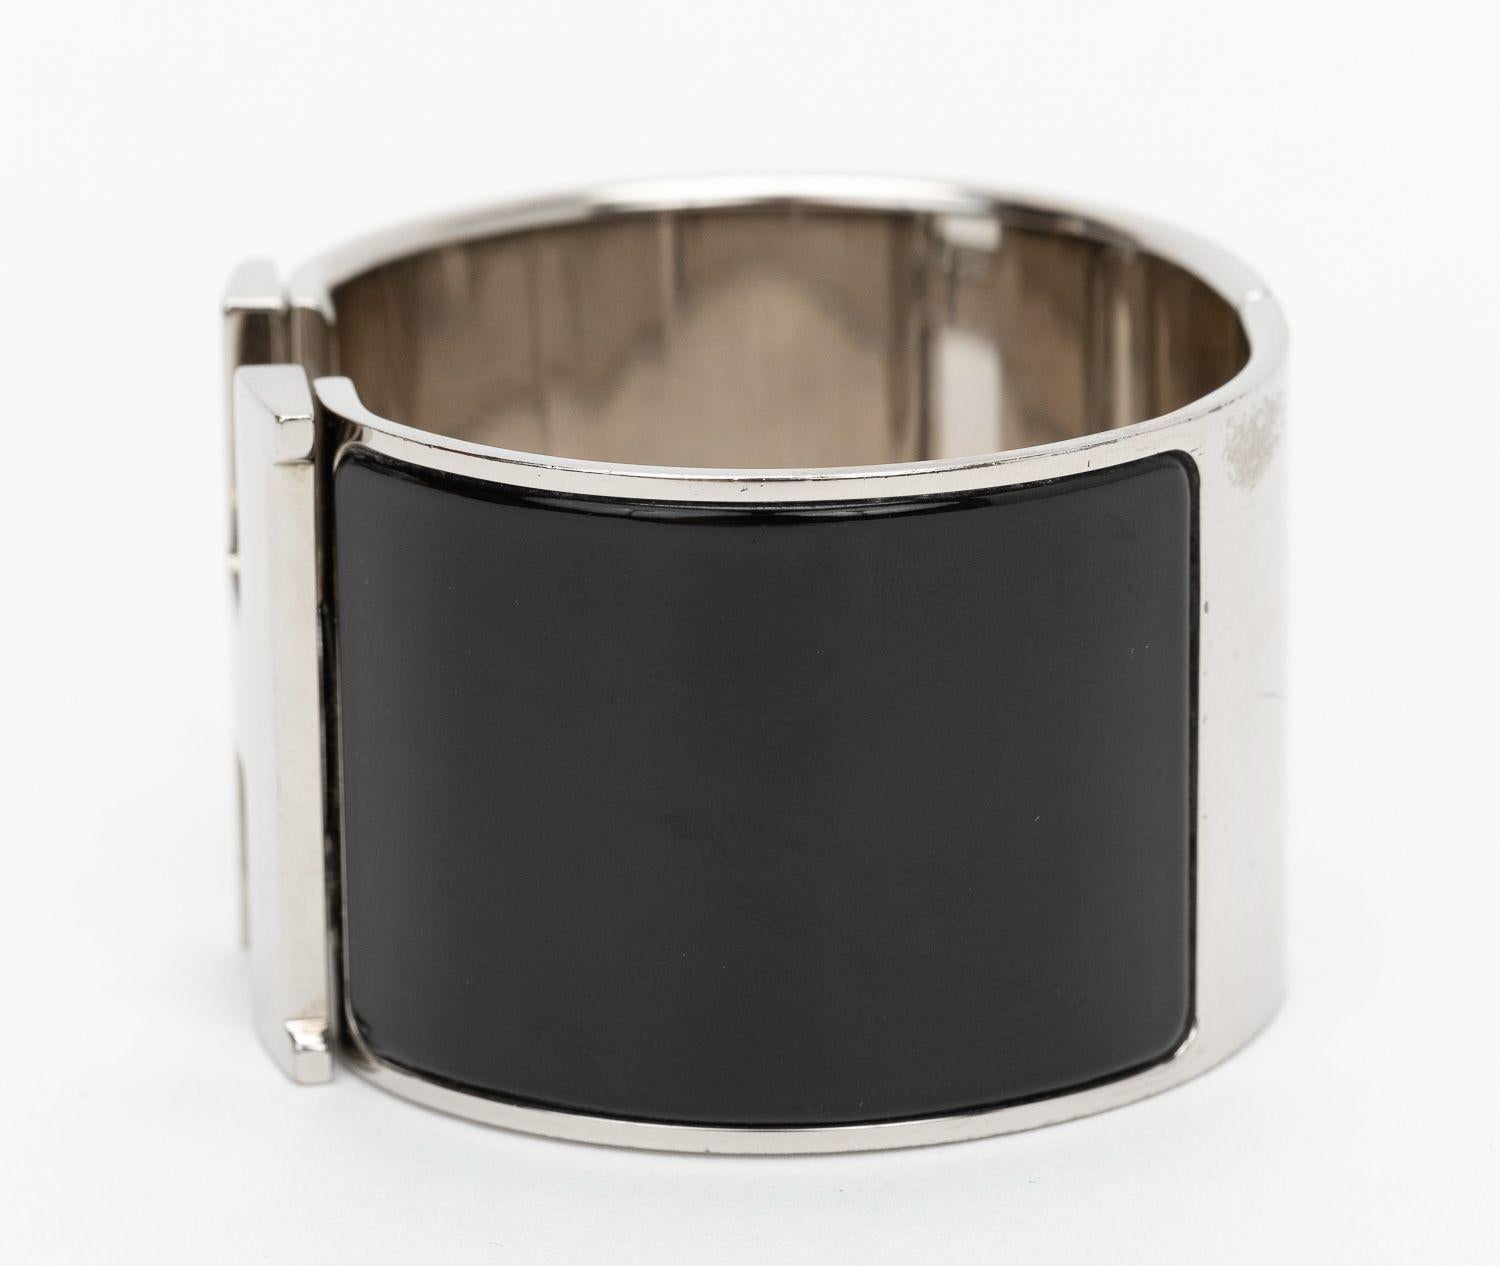 Hermès black enamel mega Clic Clac cuff bracelet. Palladium hardware. Discontinued style. Small size. Partial plastic on interior hardware, some wear throughout. Comes with original box. (slightly damaged).